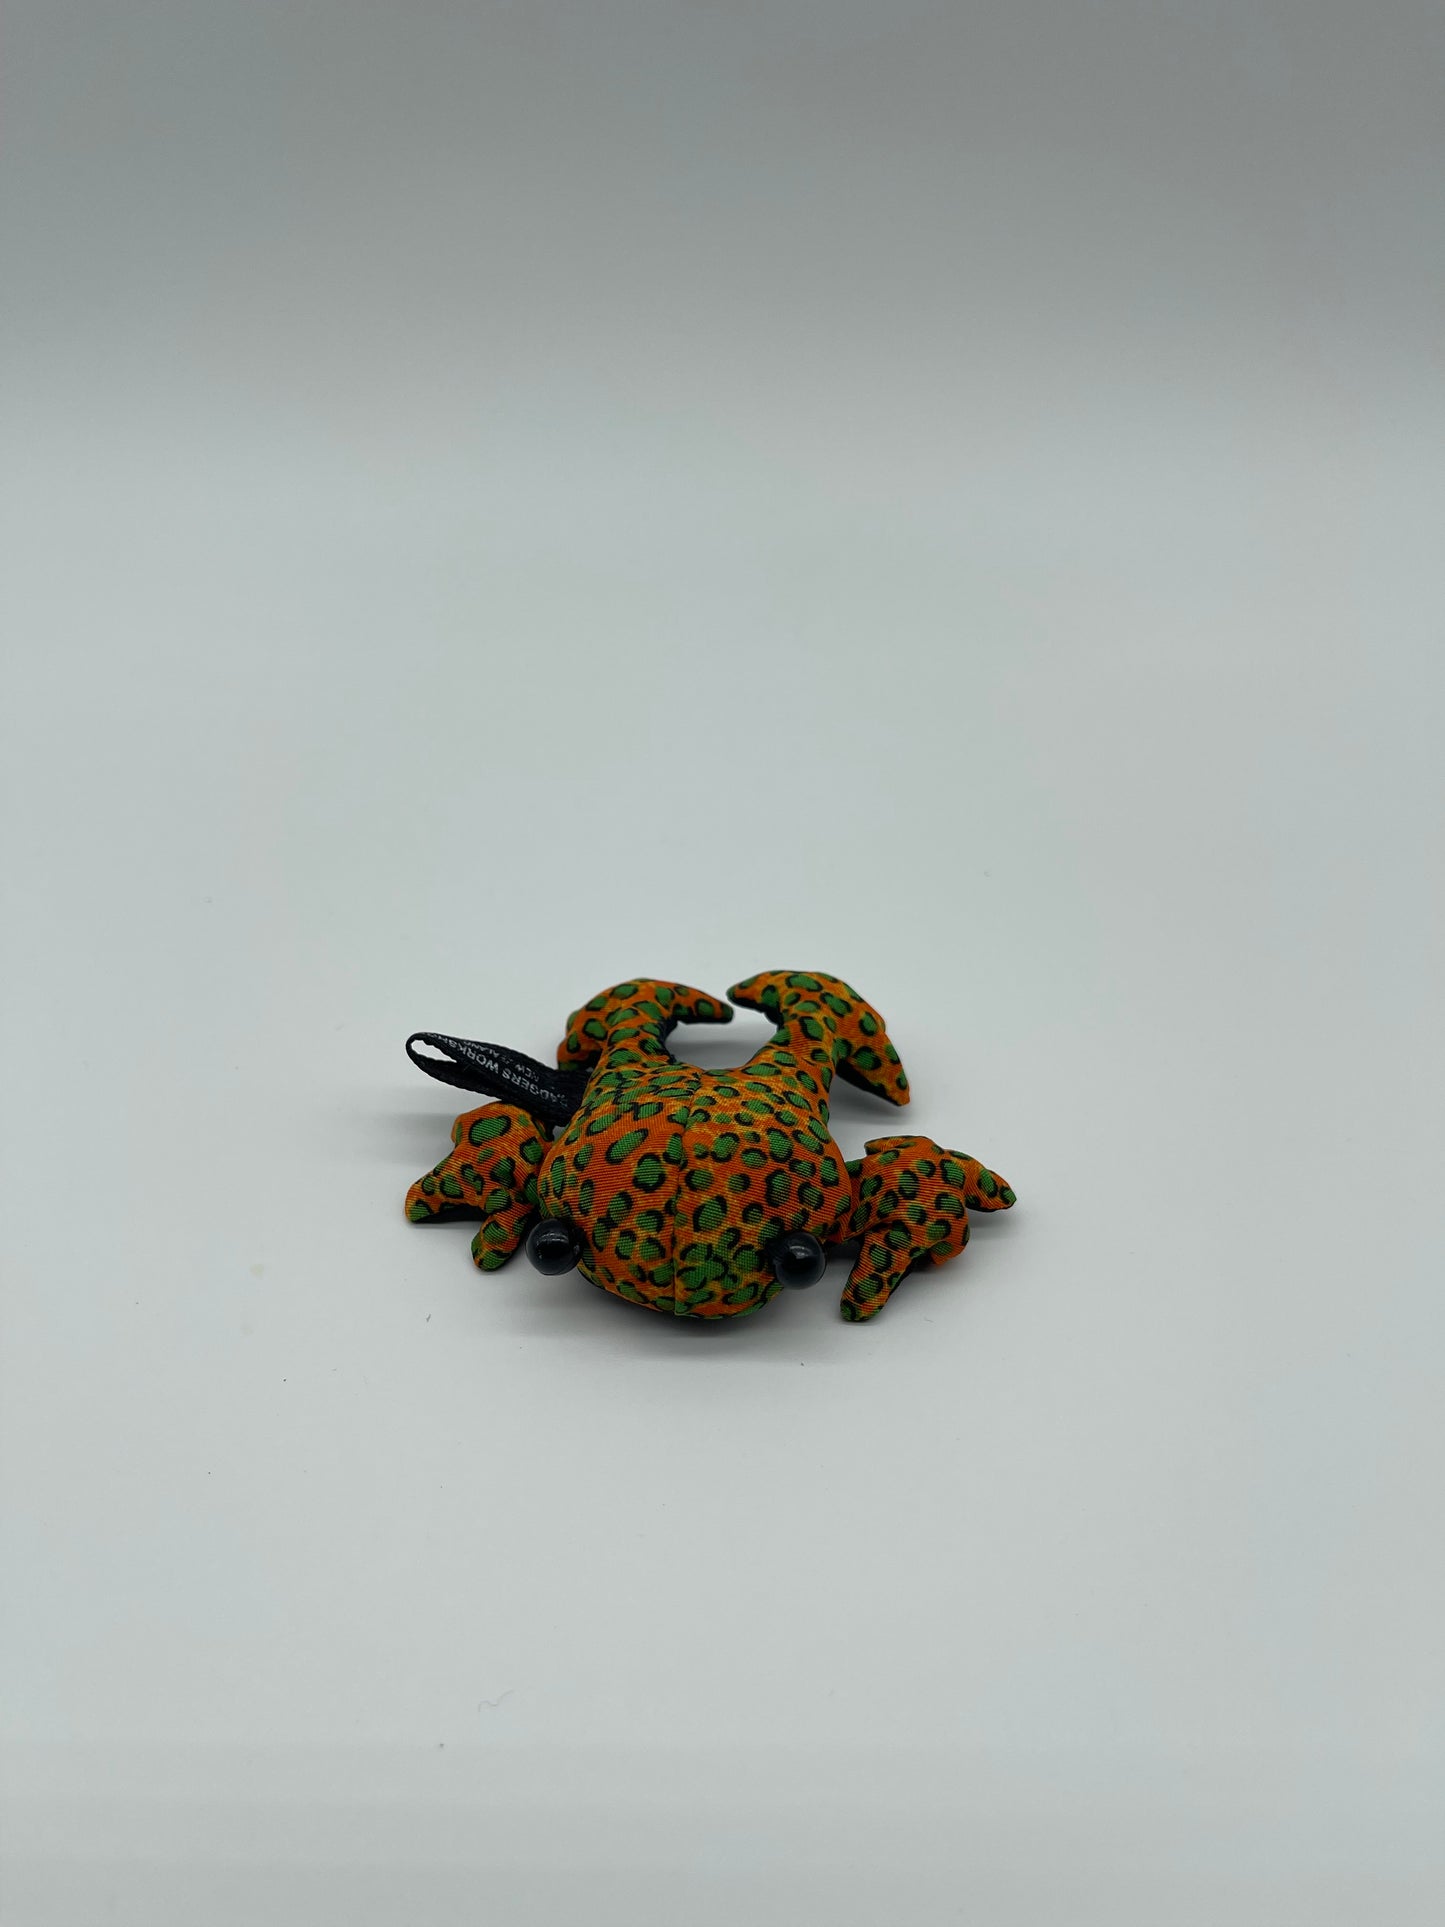 Frog Baby Paperweight